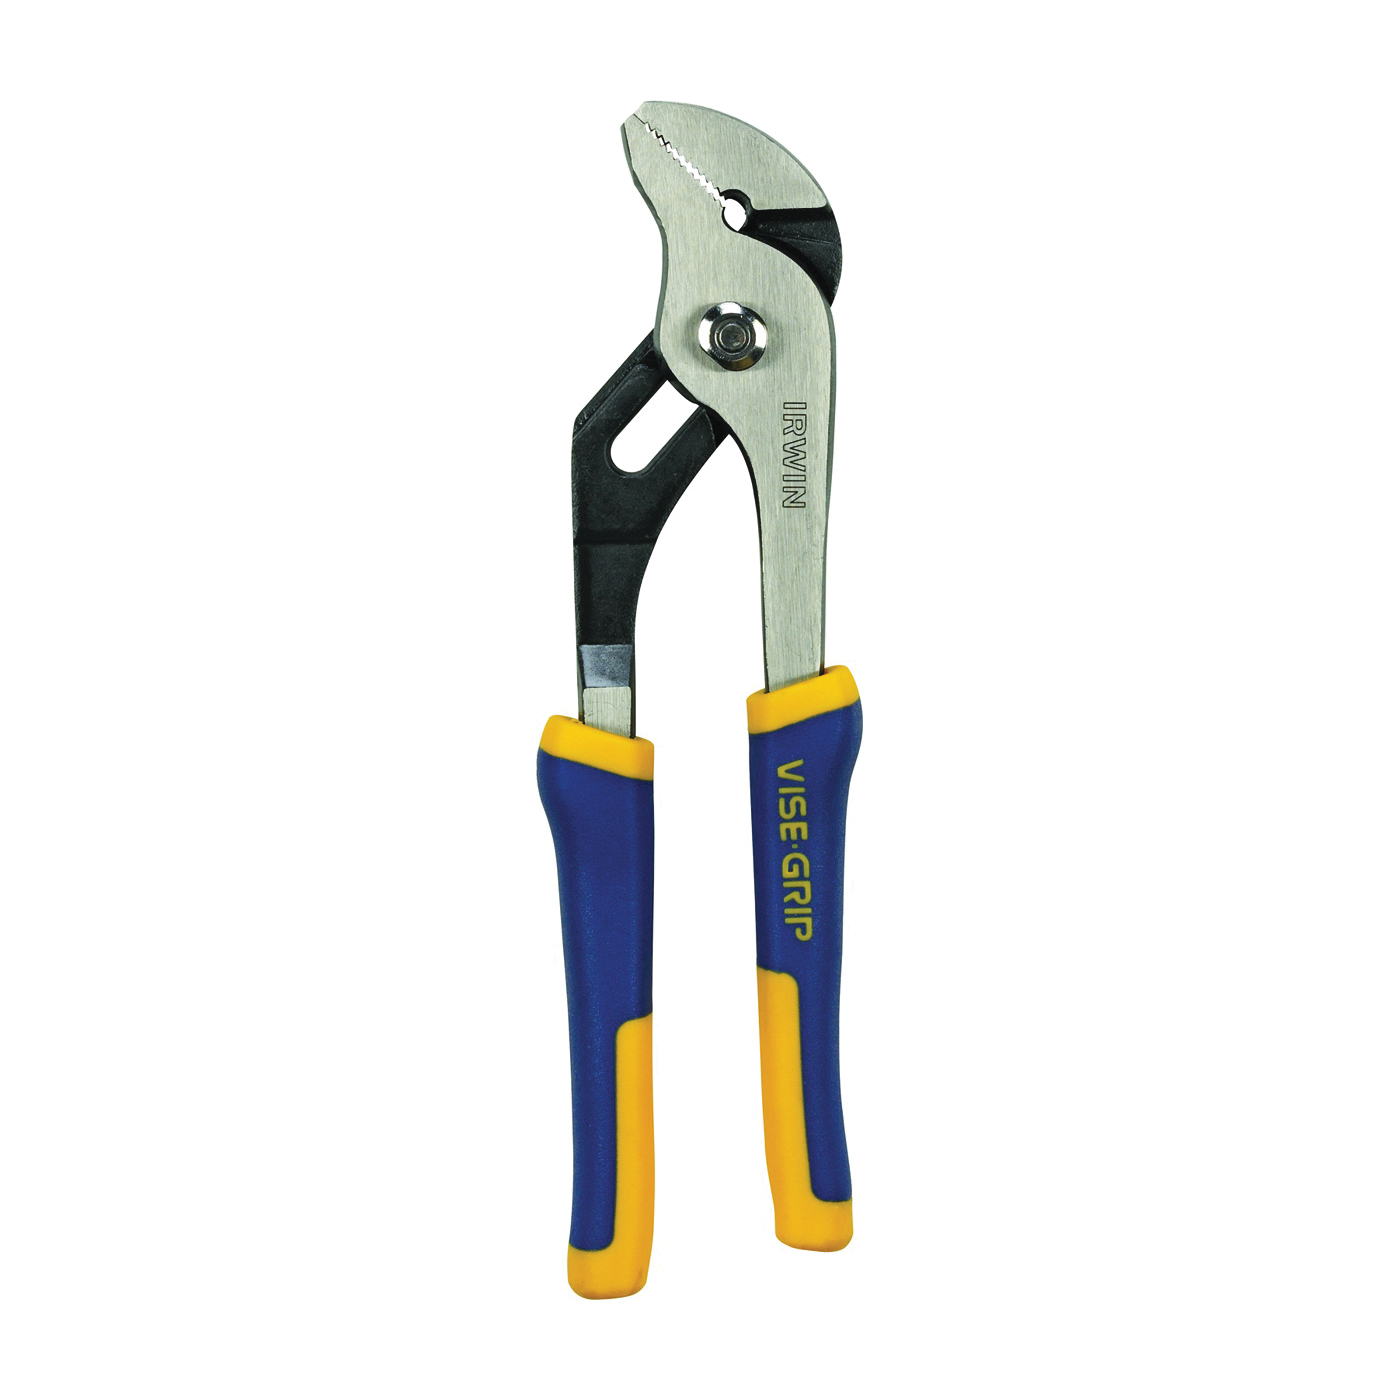 4935320 Groove Joint Plier, 8 in OAL, 1-3/4 in Jaw Opening, Blue/Yellow Handle, Cushion-Grip Handle, 1 in L Jaw